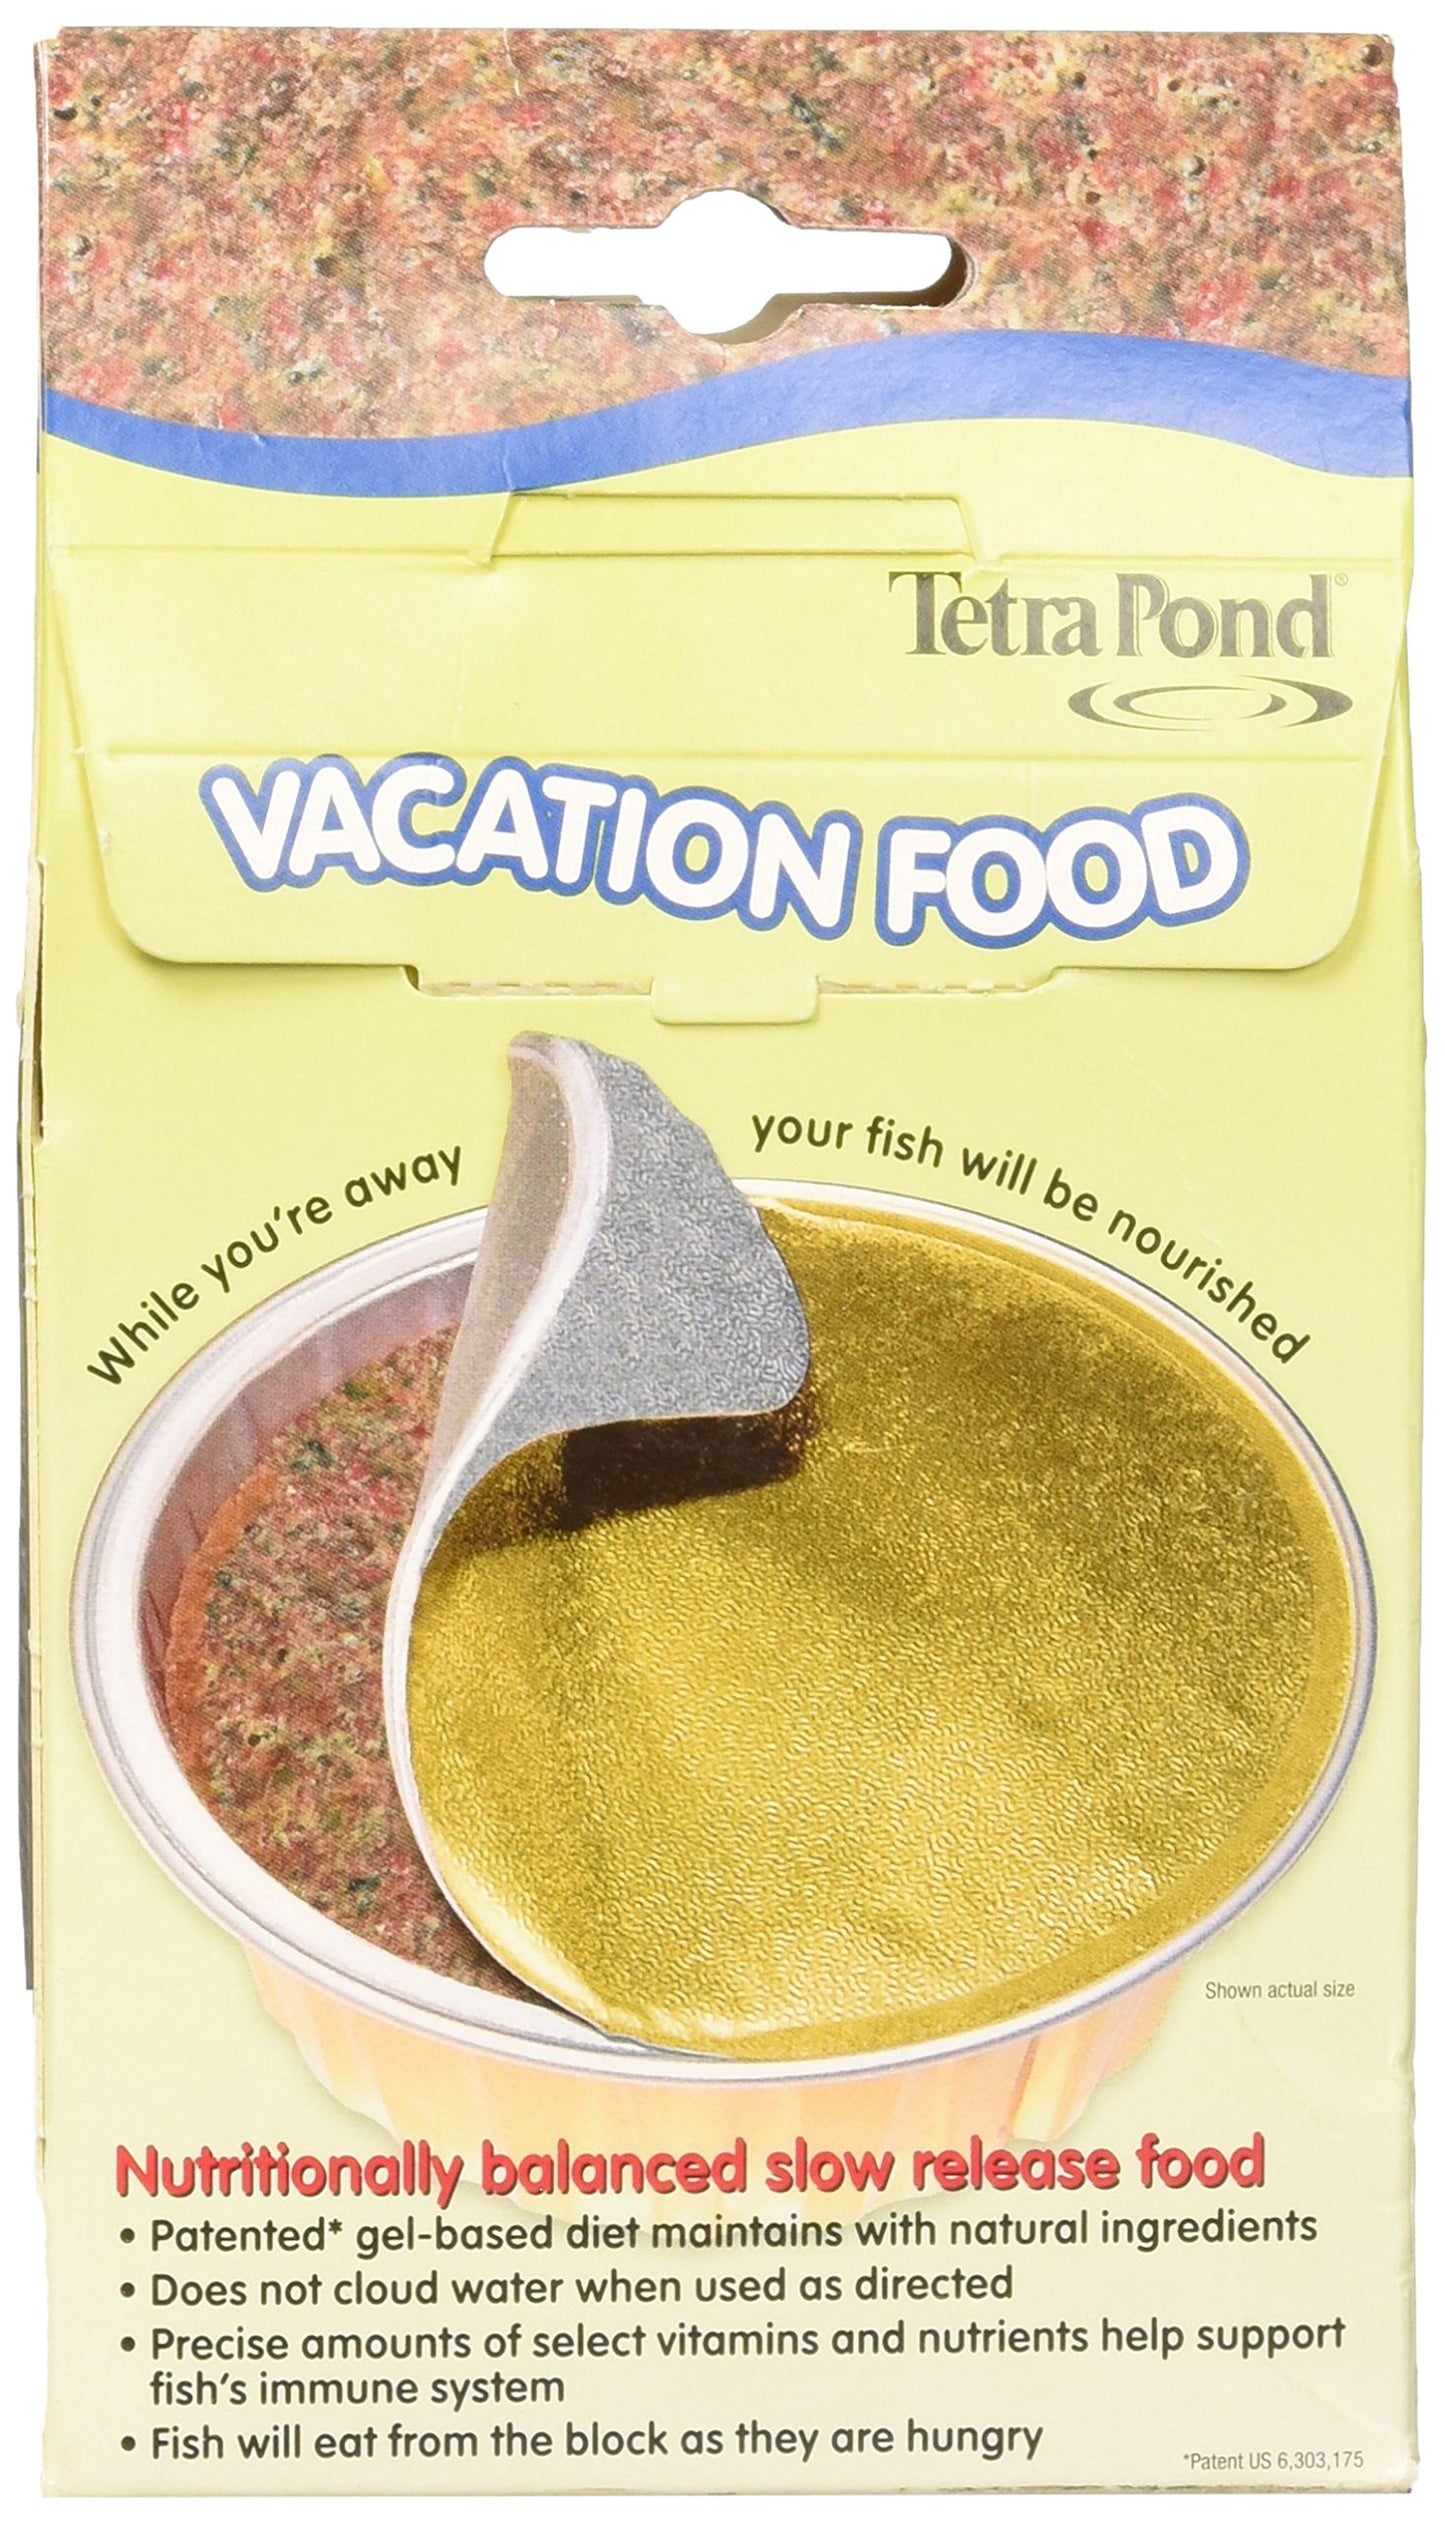 (4 Pack) TetraPond Vacation Food Slow Release Feeder Block, 3.45 Ounce Each